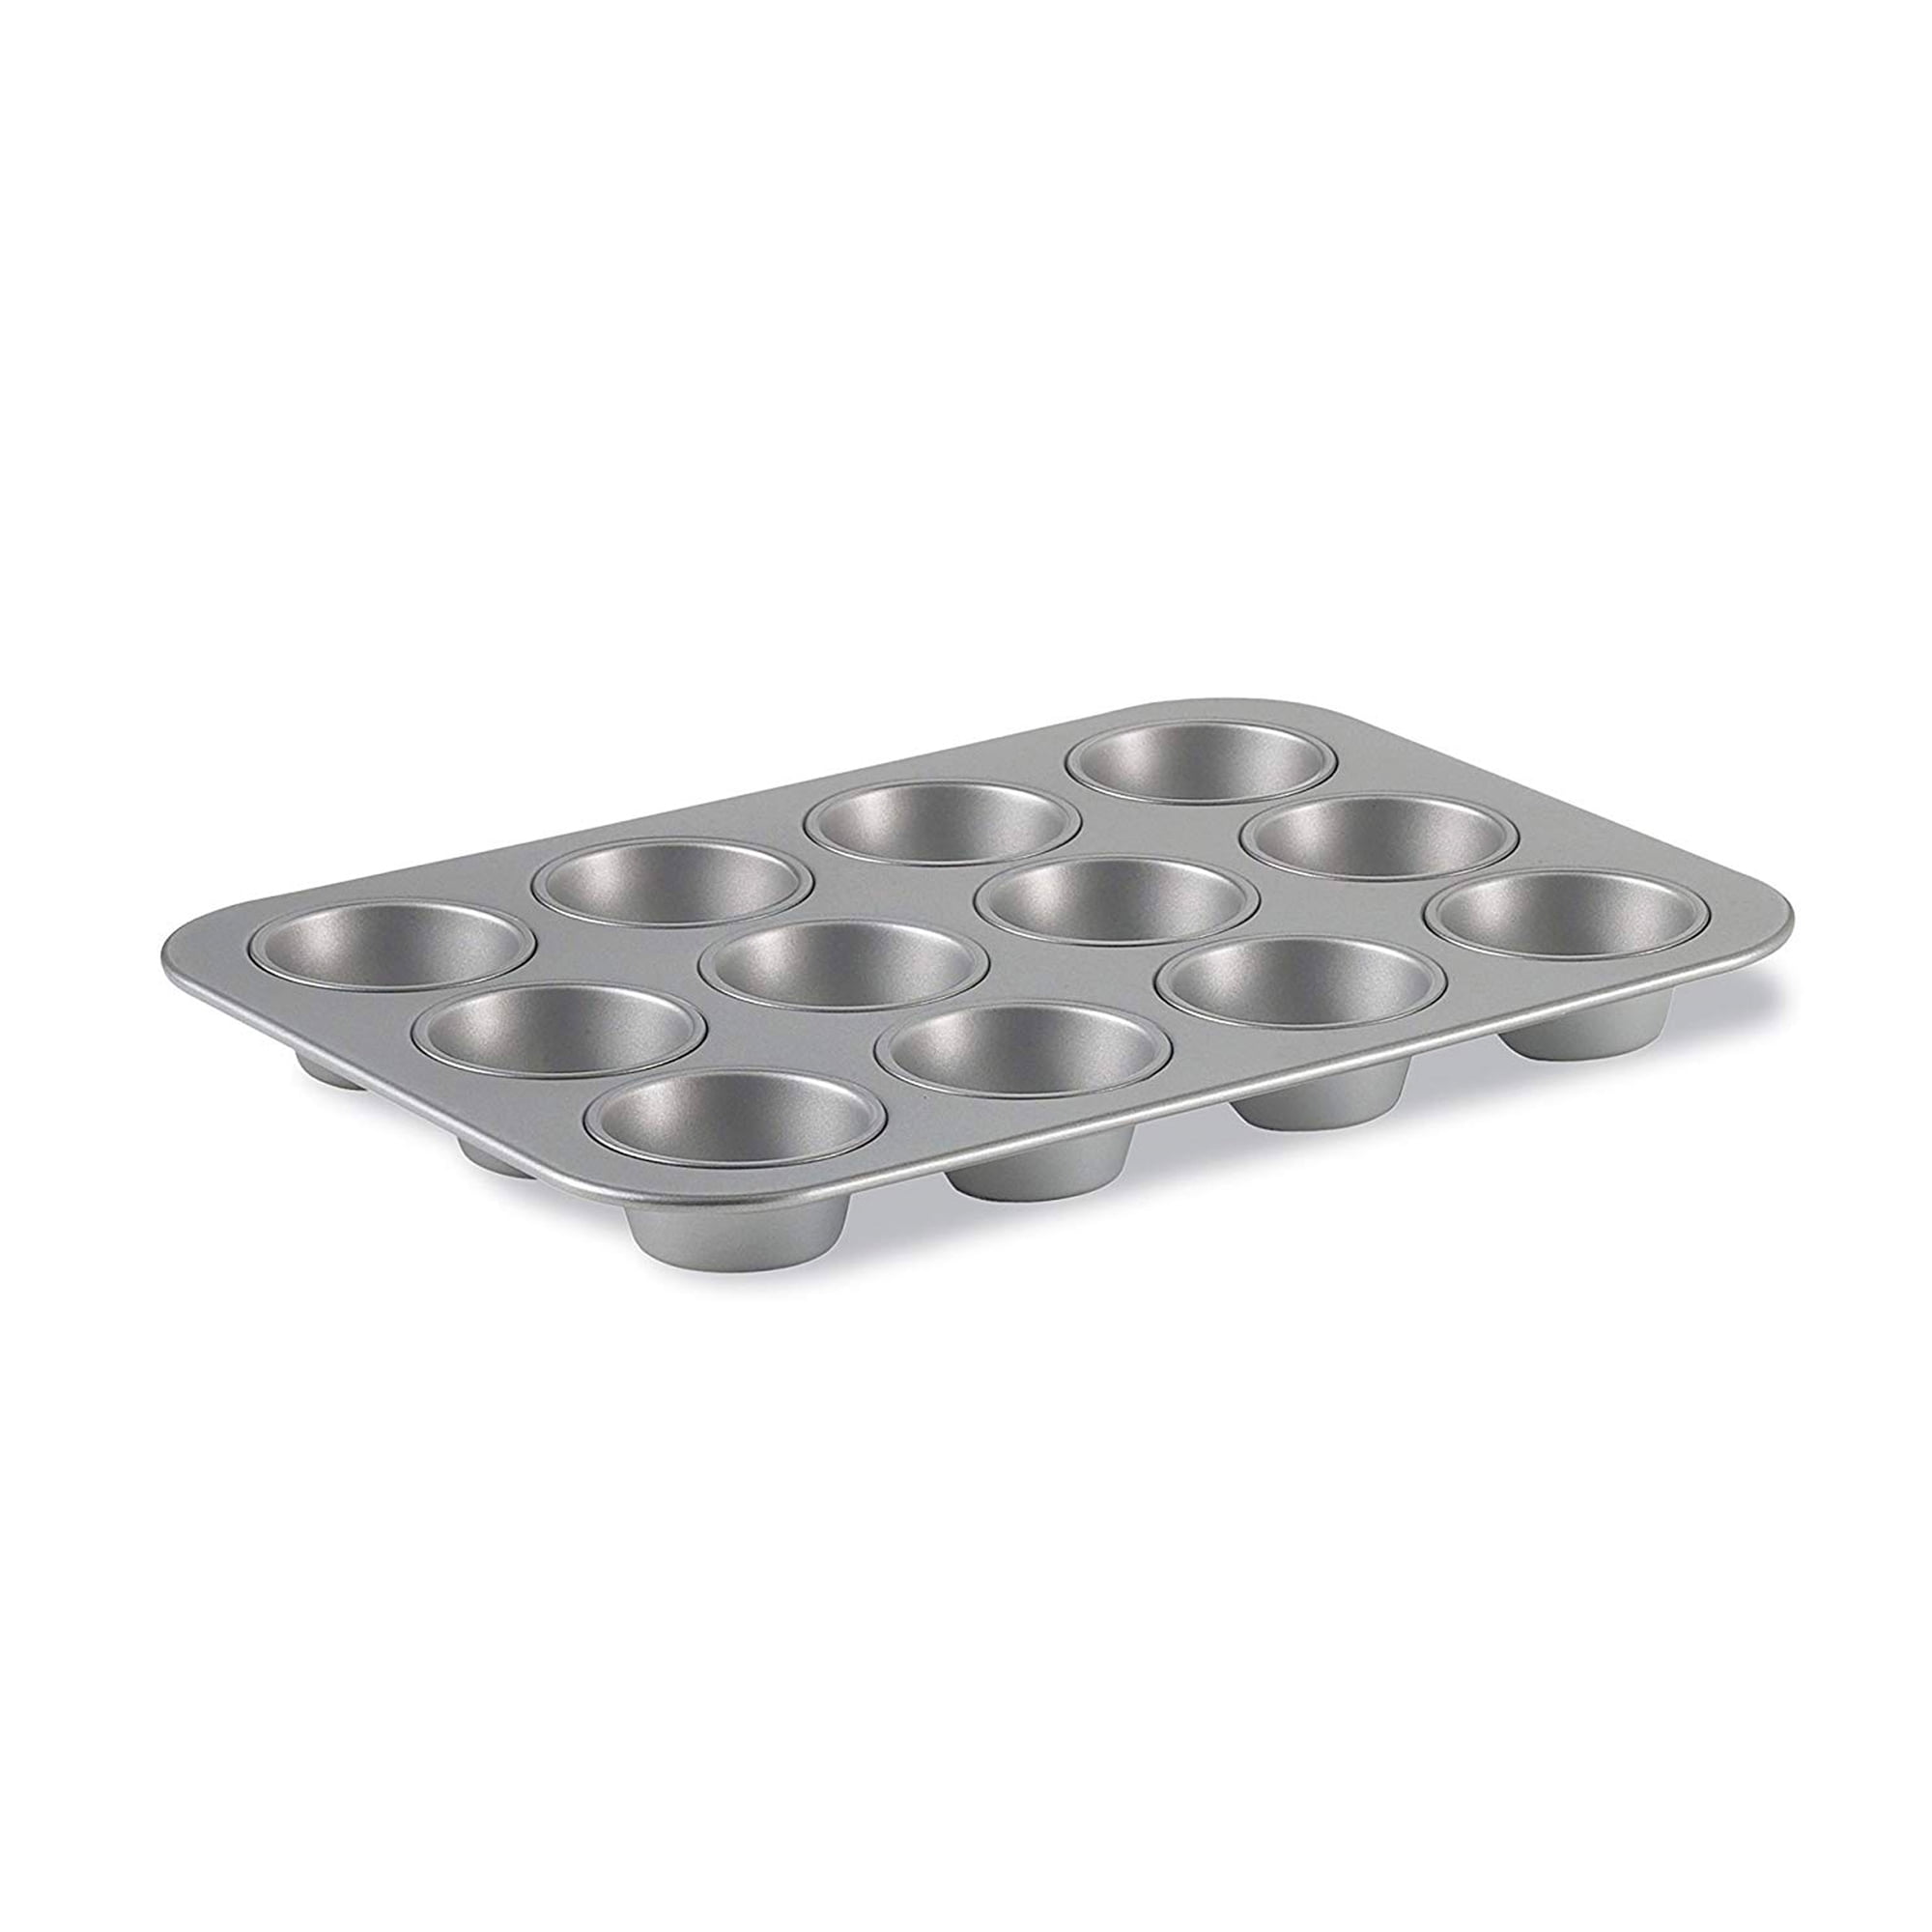 Mini Muffin &Cupcake Set, 24 Cups 2-Pieces, Nonstick Silicone Baking Pan,  BPA Free and Dishwasher Safe, Great for Making Muffin Cakes, Tart, Bread  (24